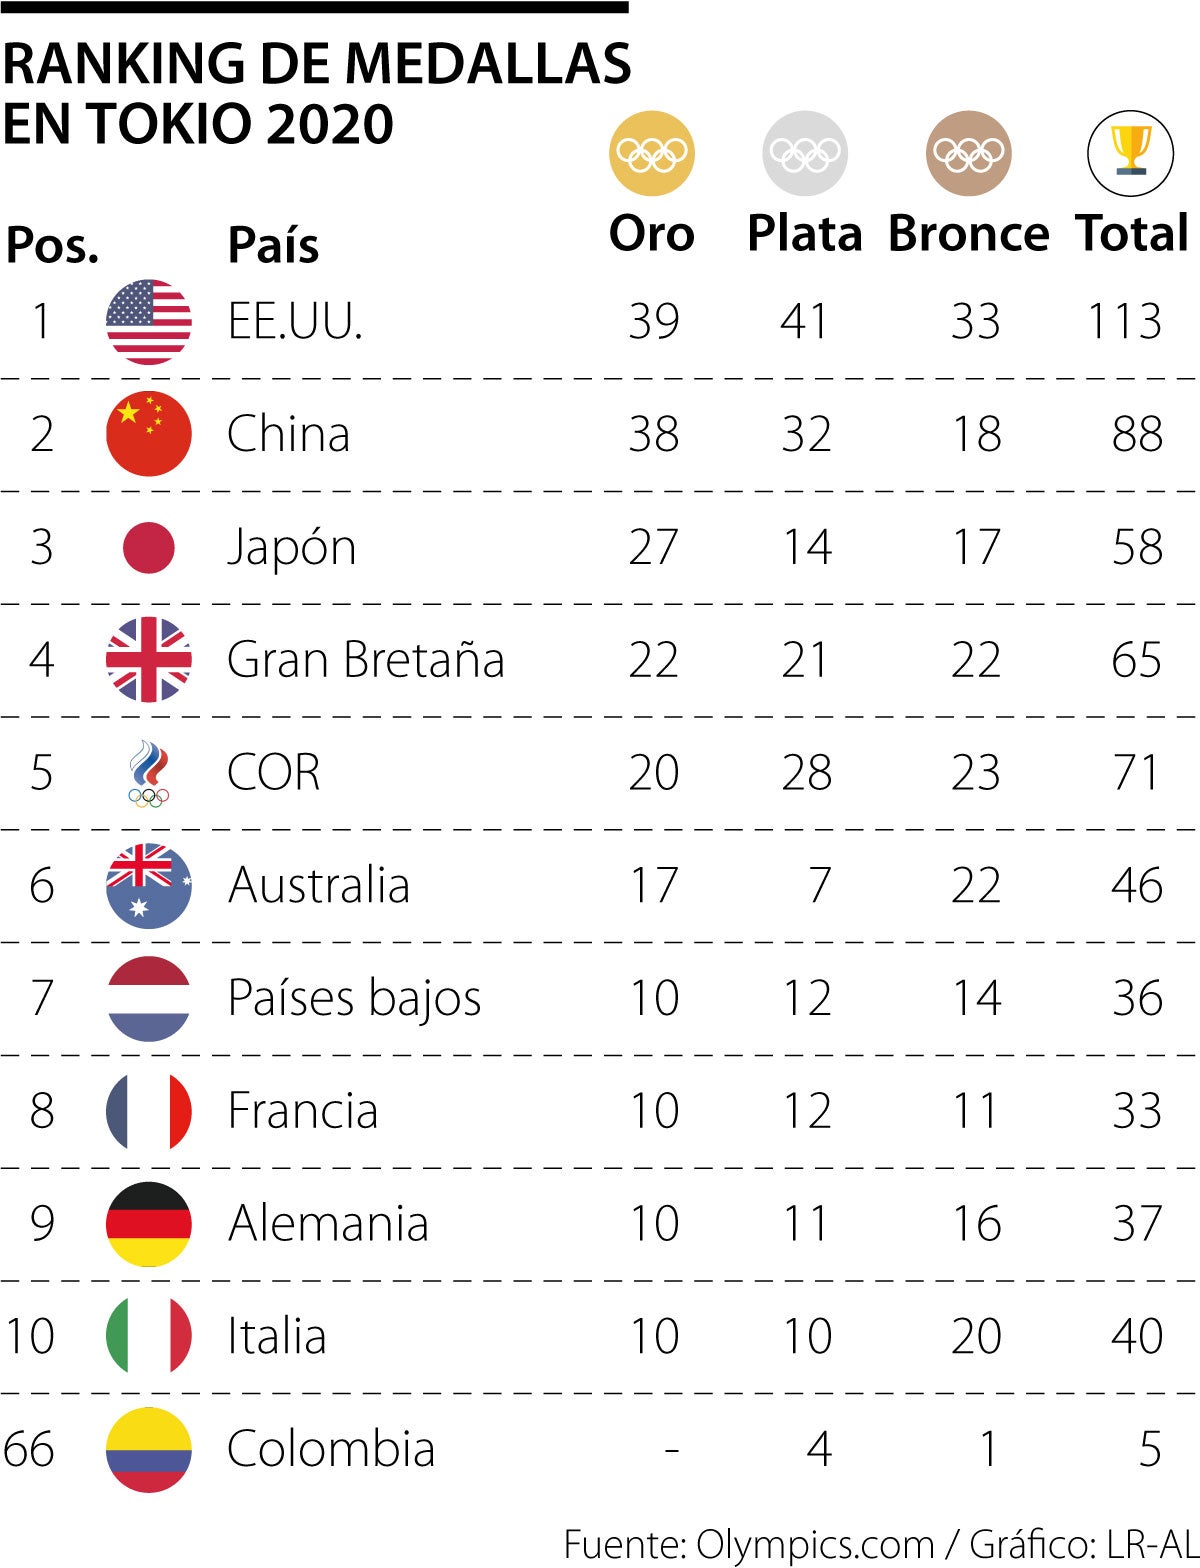 Meet the countries that won the most medals at the 2020 Tokyo Olympics